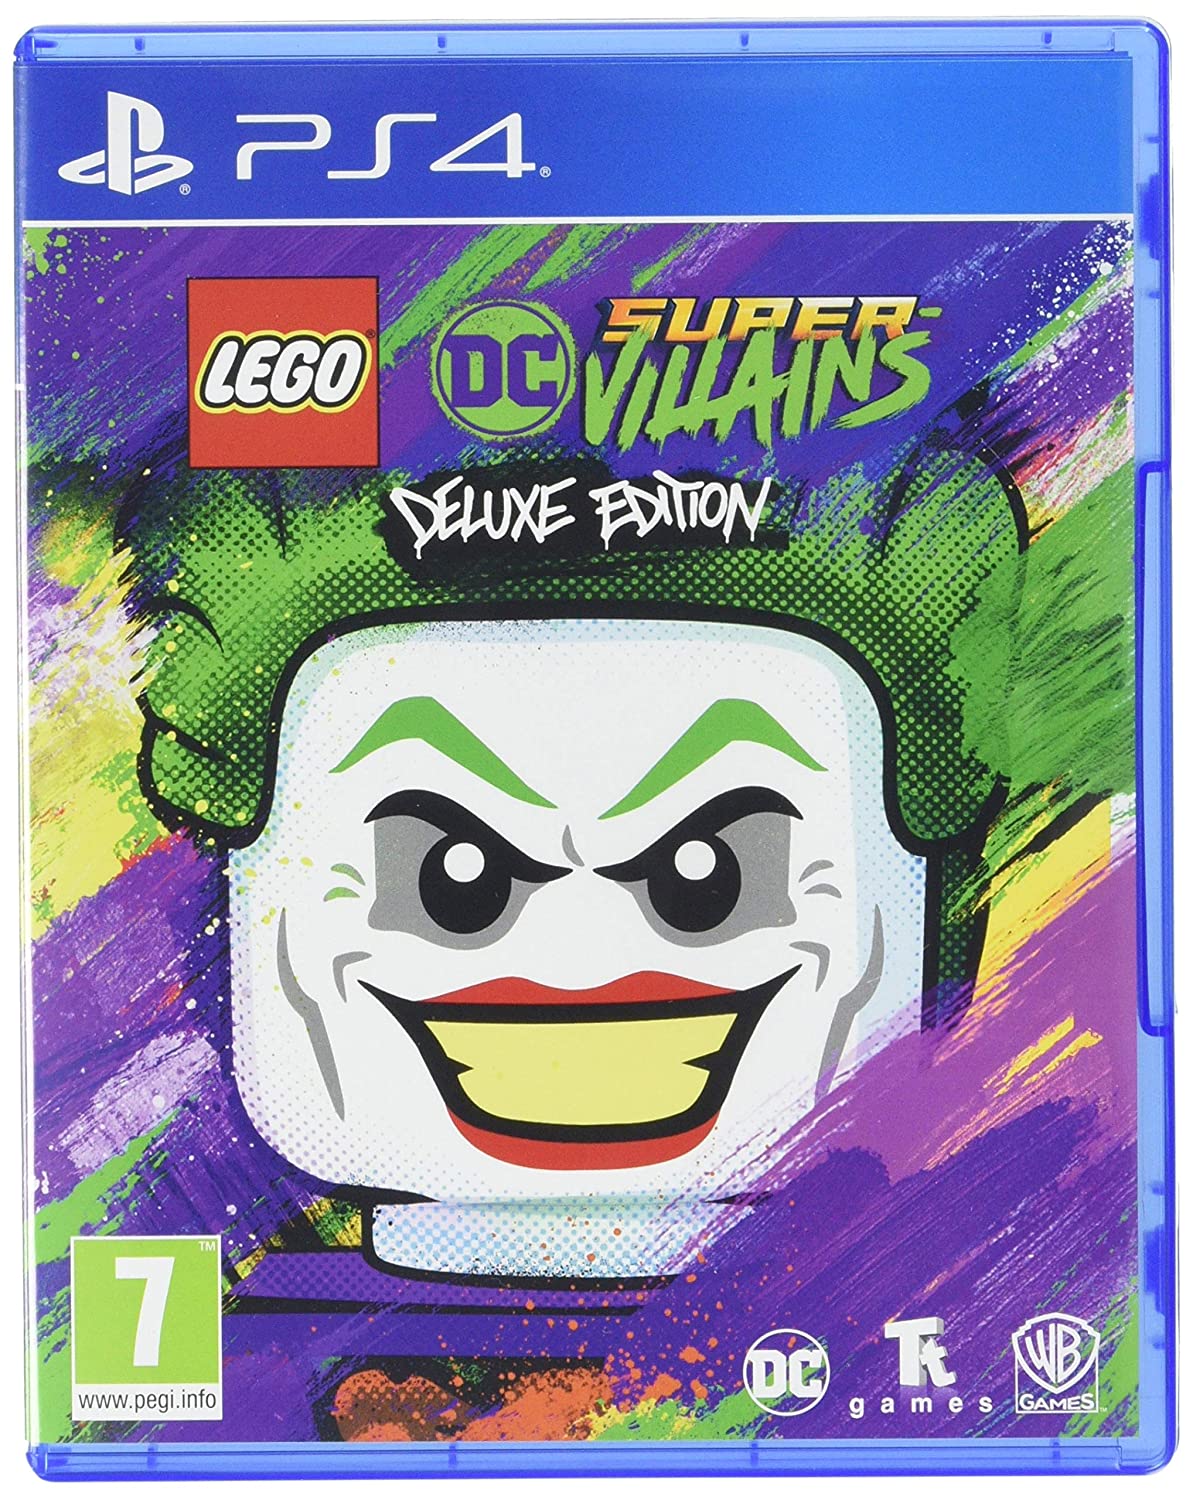 LEGO DC SUPERVILLAINS DELUXE EDITION PS4